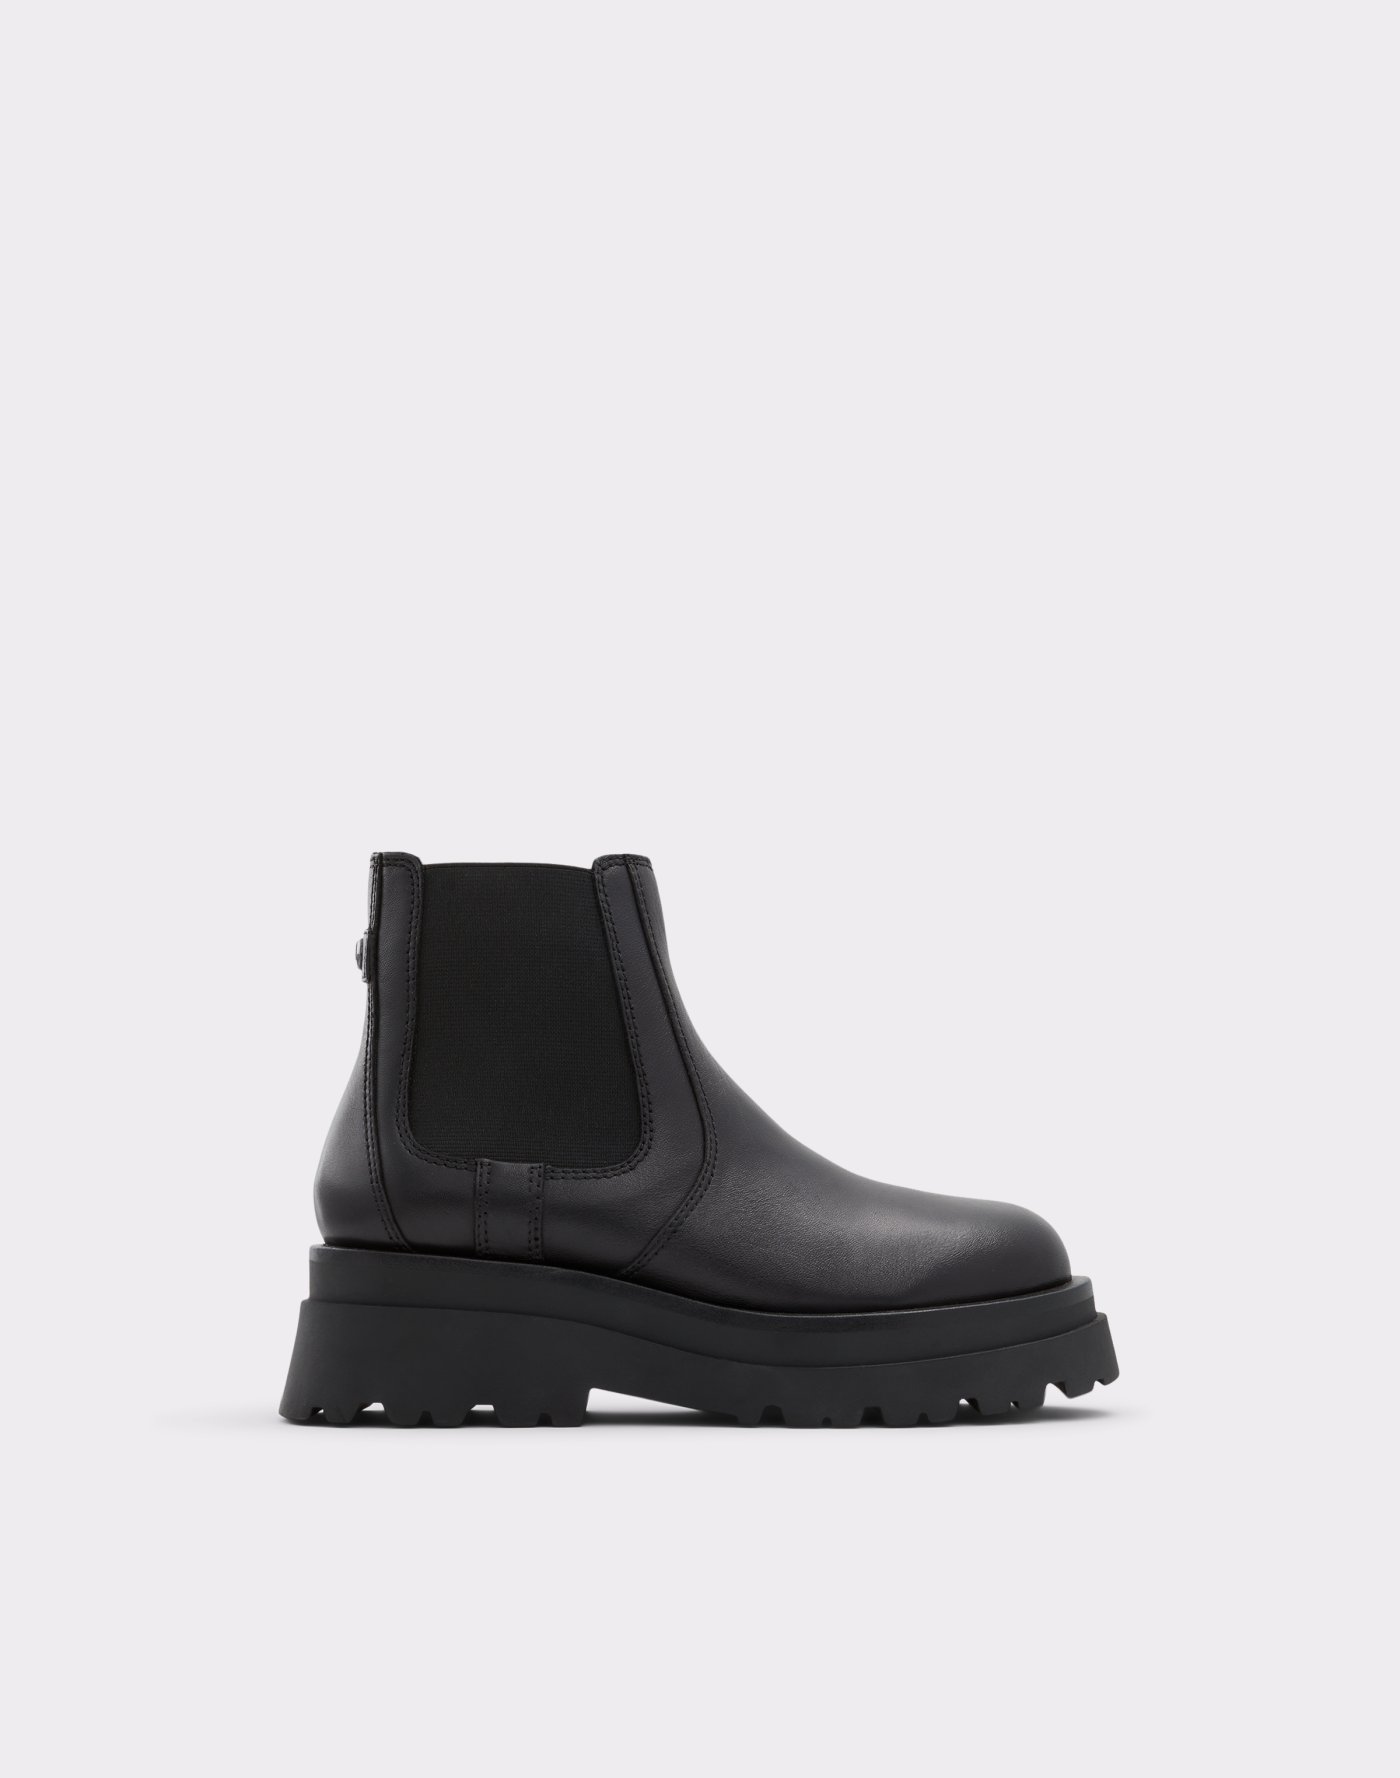 Claire effect fast Women's Boots, Booties & Ankle Boots | ALDO US